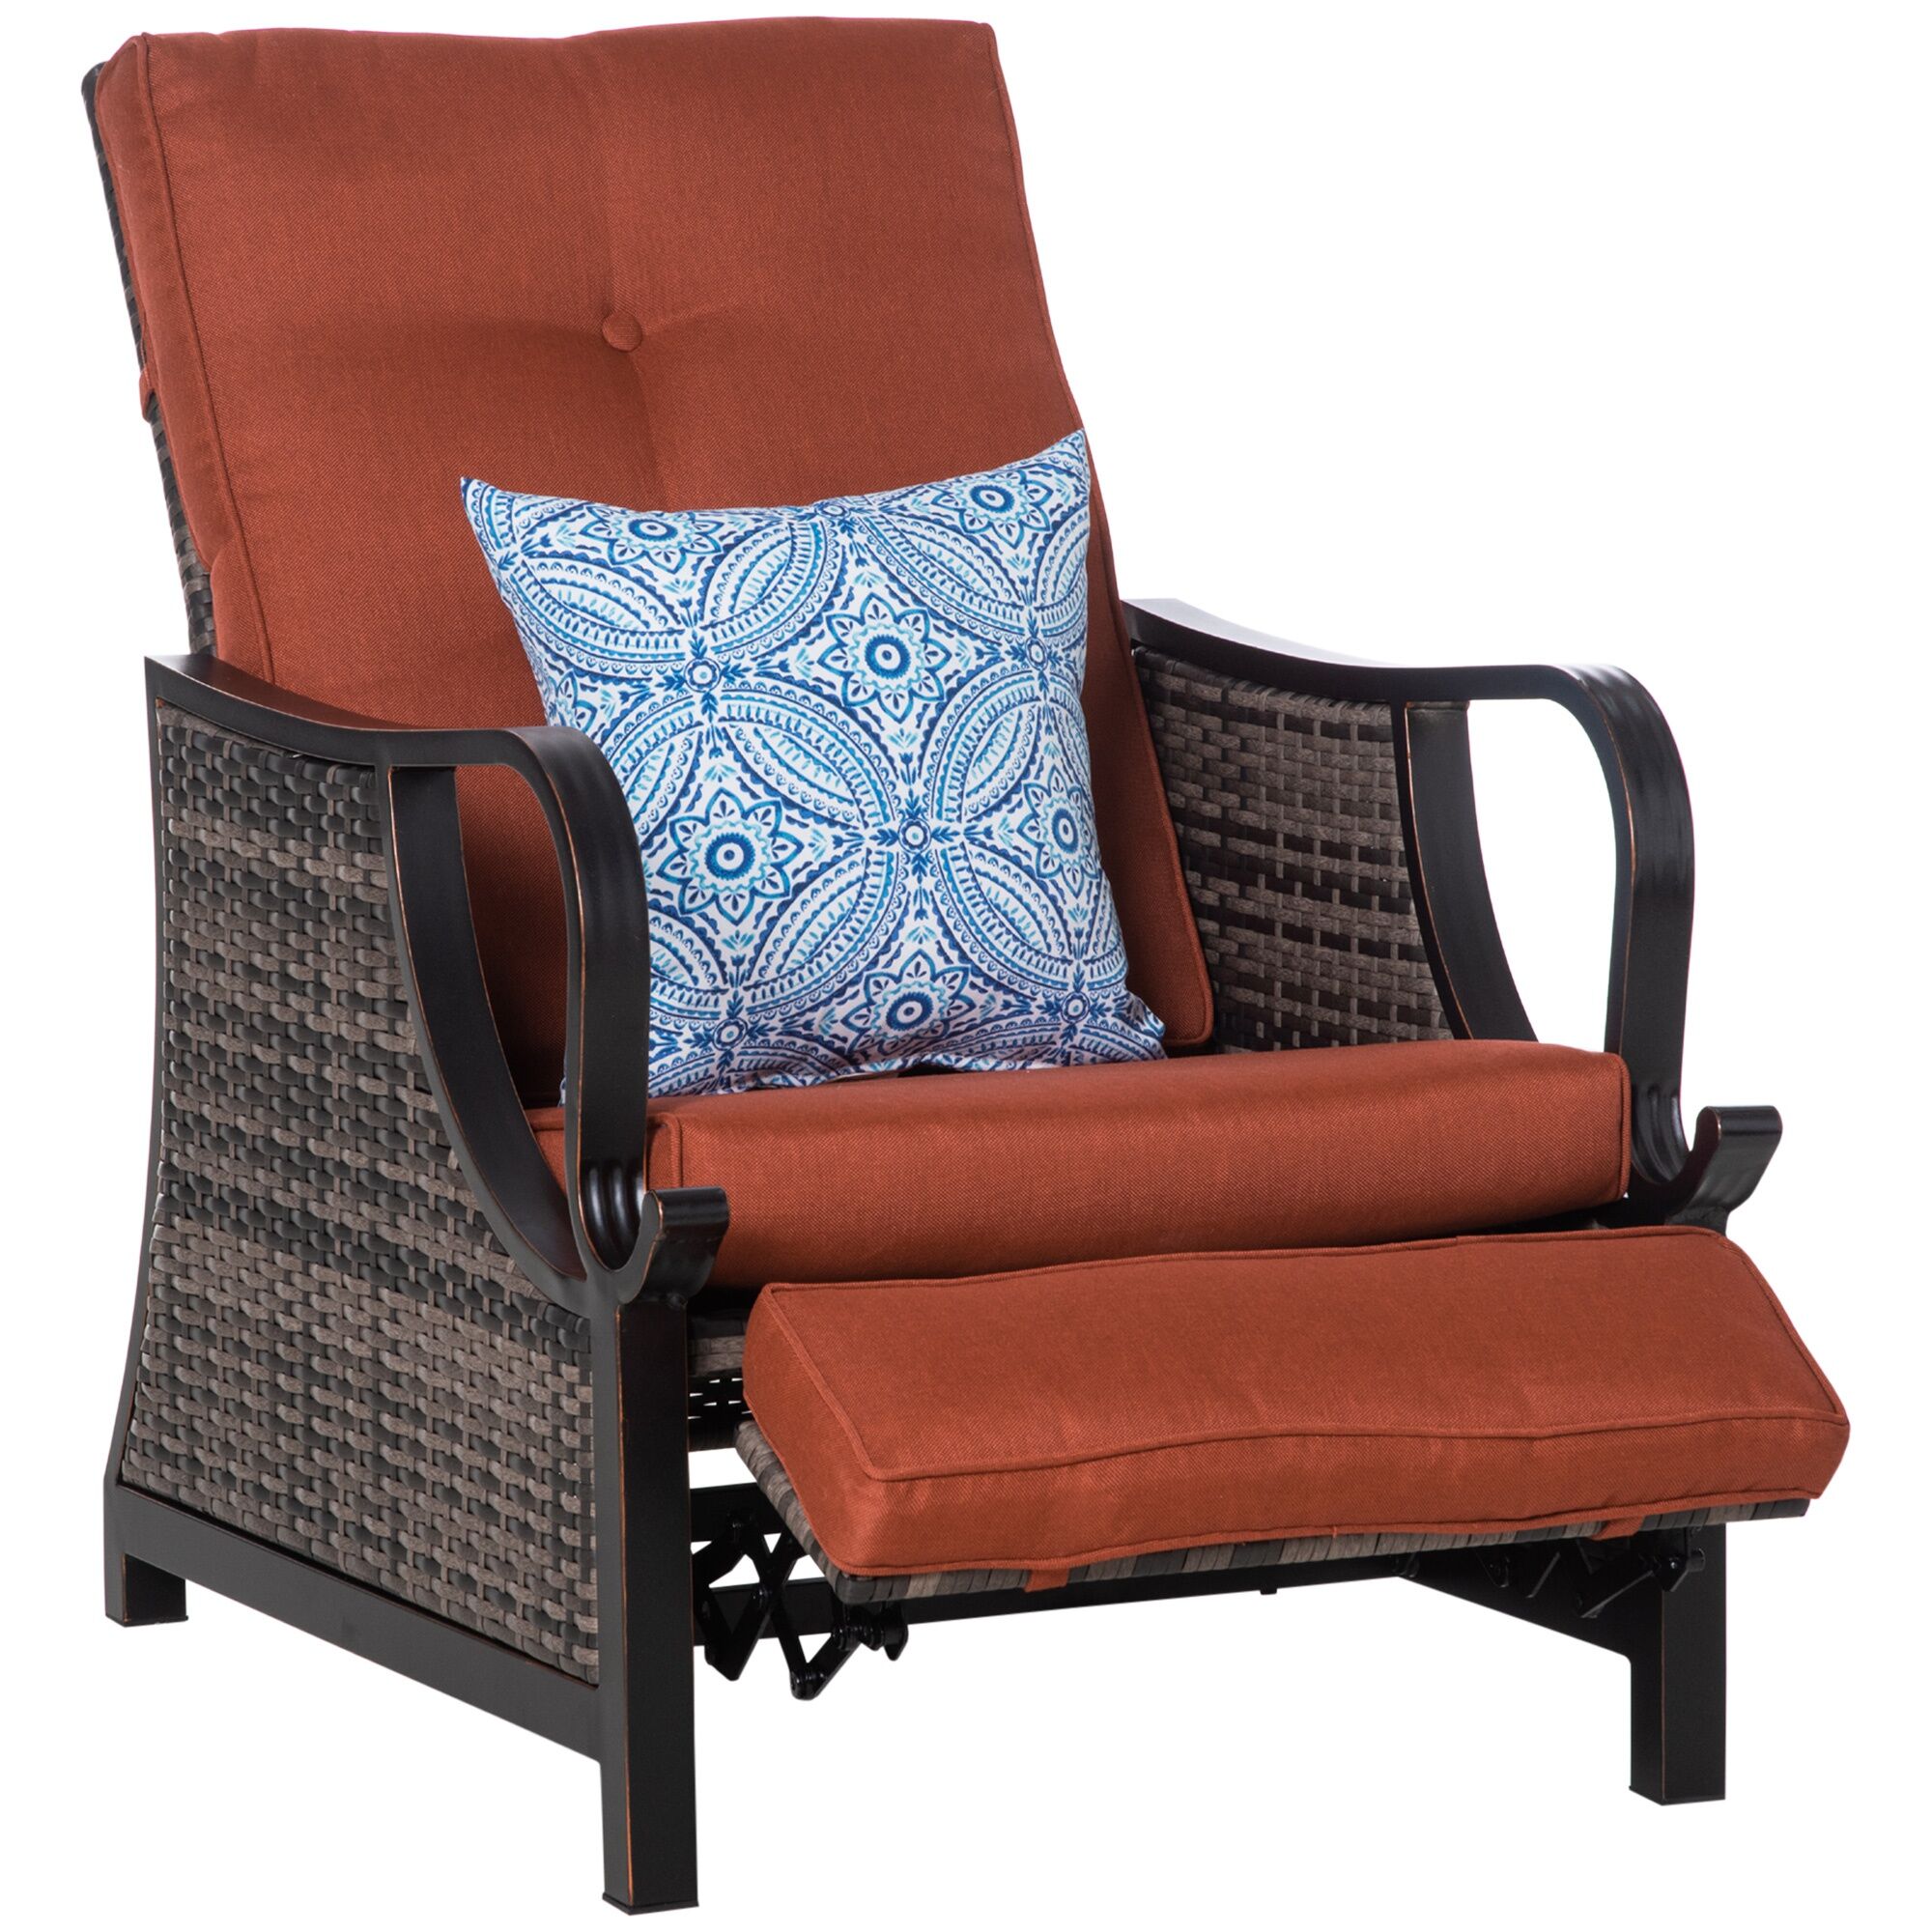 Outsunny Outdoor Patio Recliner with All Hand-Woven Wicker, Adjustable Lounge Chair w/ Cushions, Rust-Resistant Metal Frame for Backyard, Red